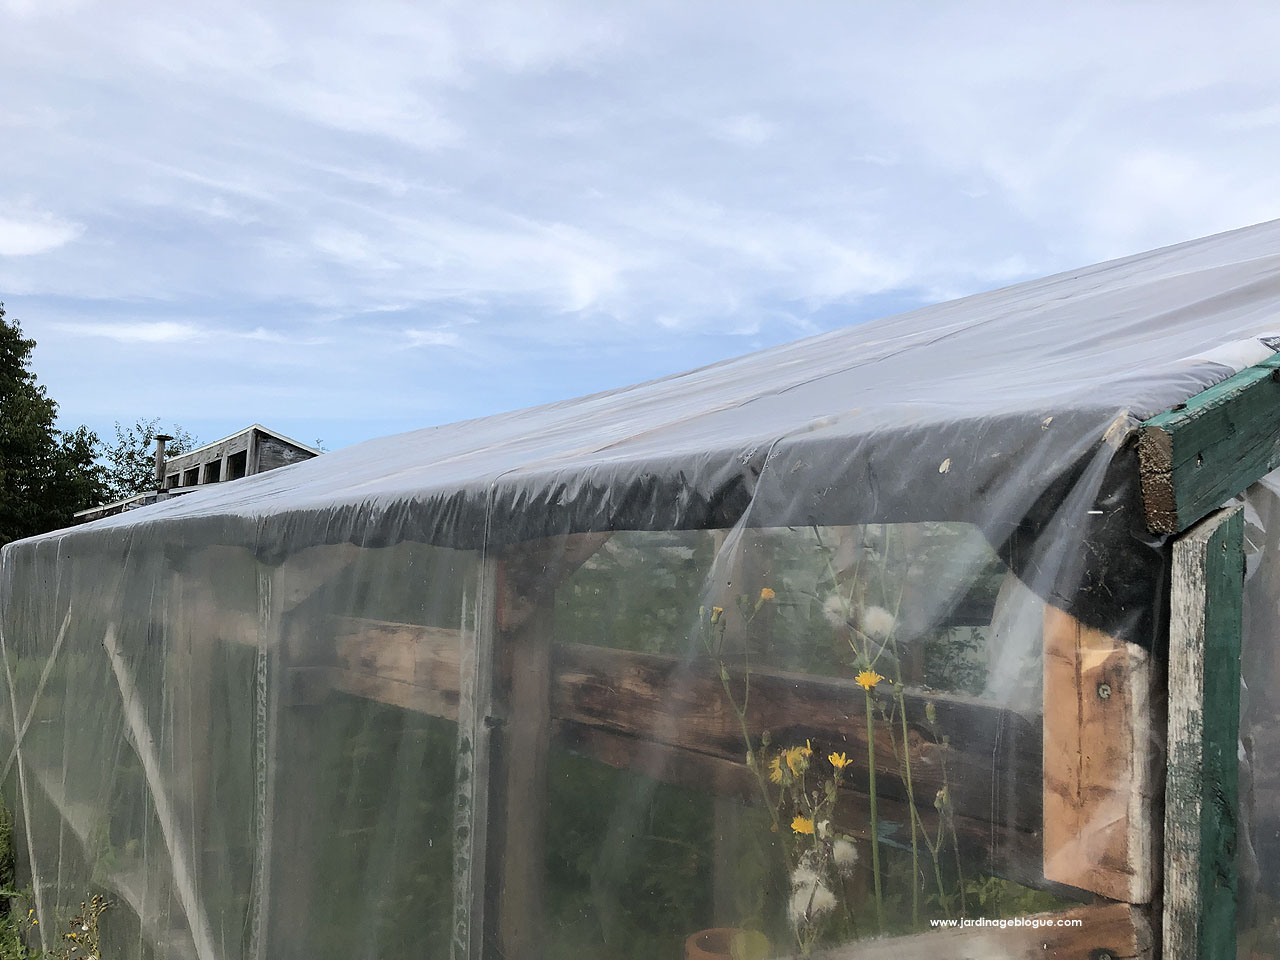 Protect greenhouse plastic cover from wood frame